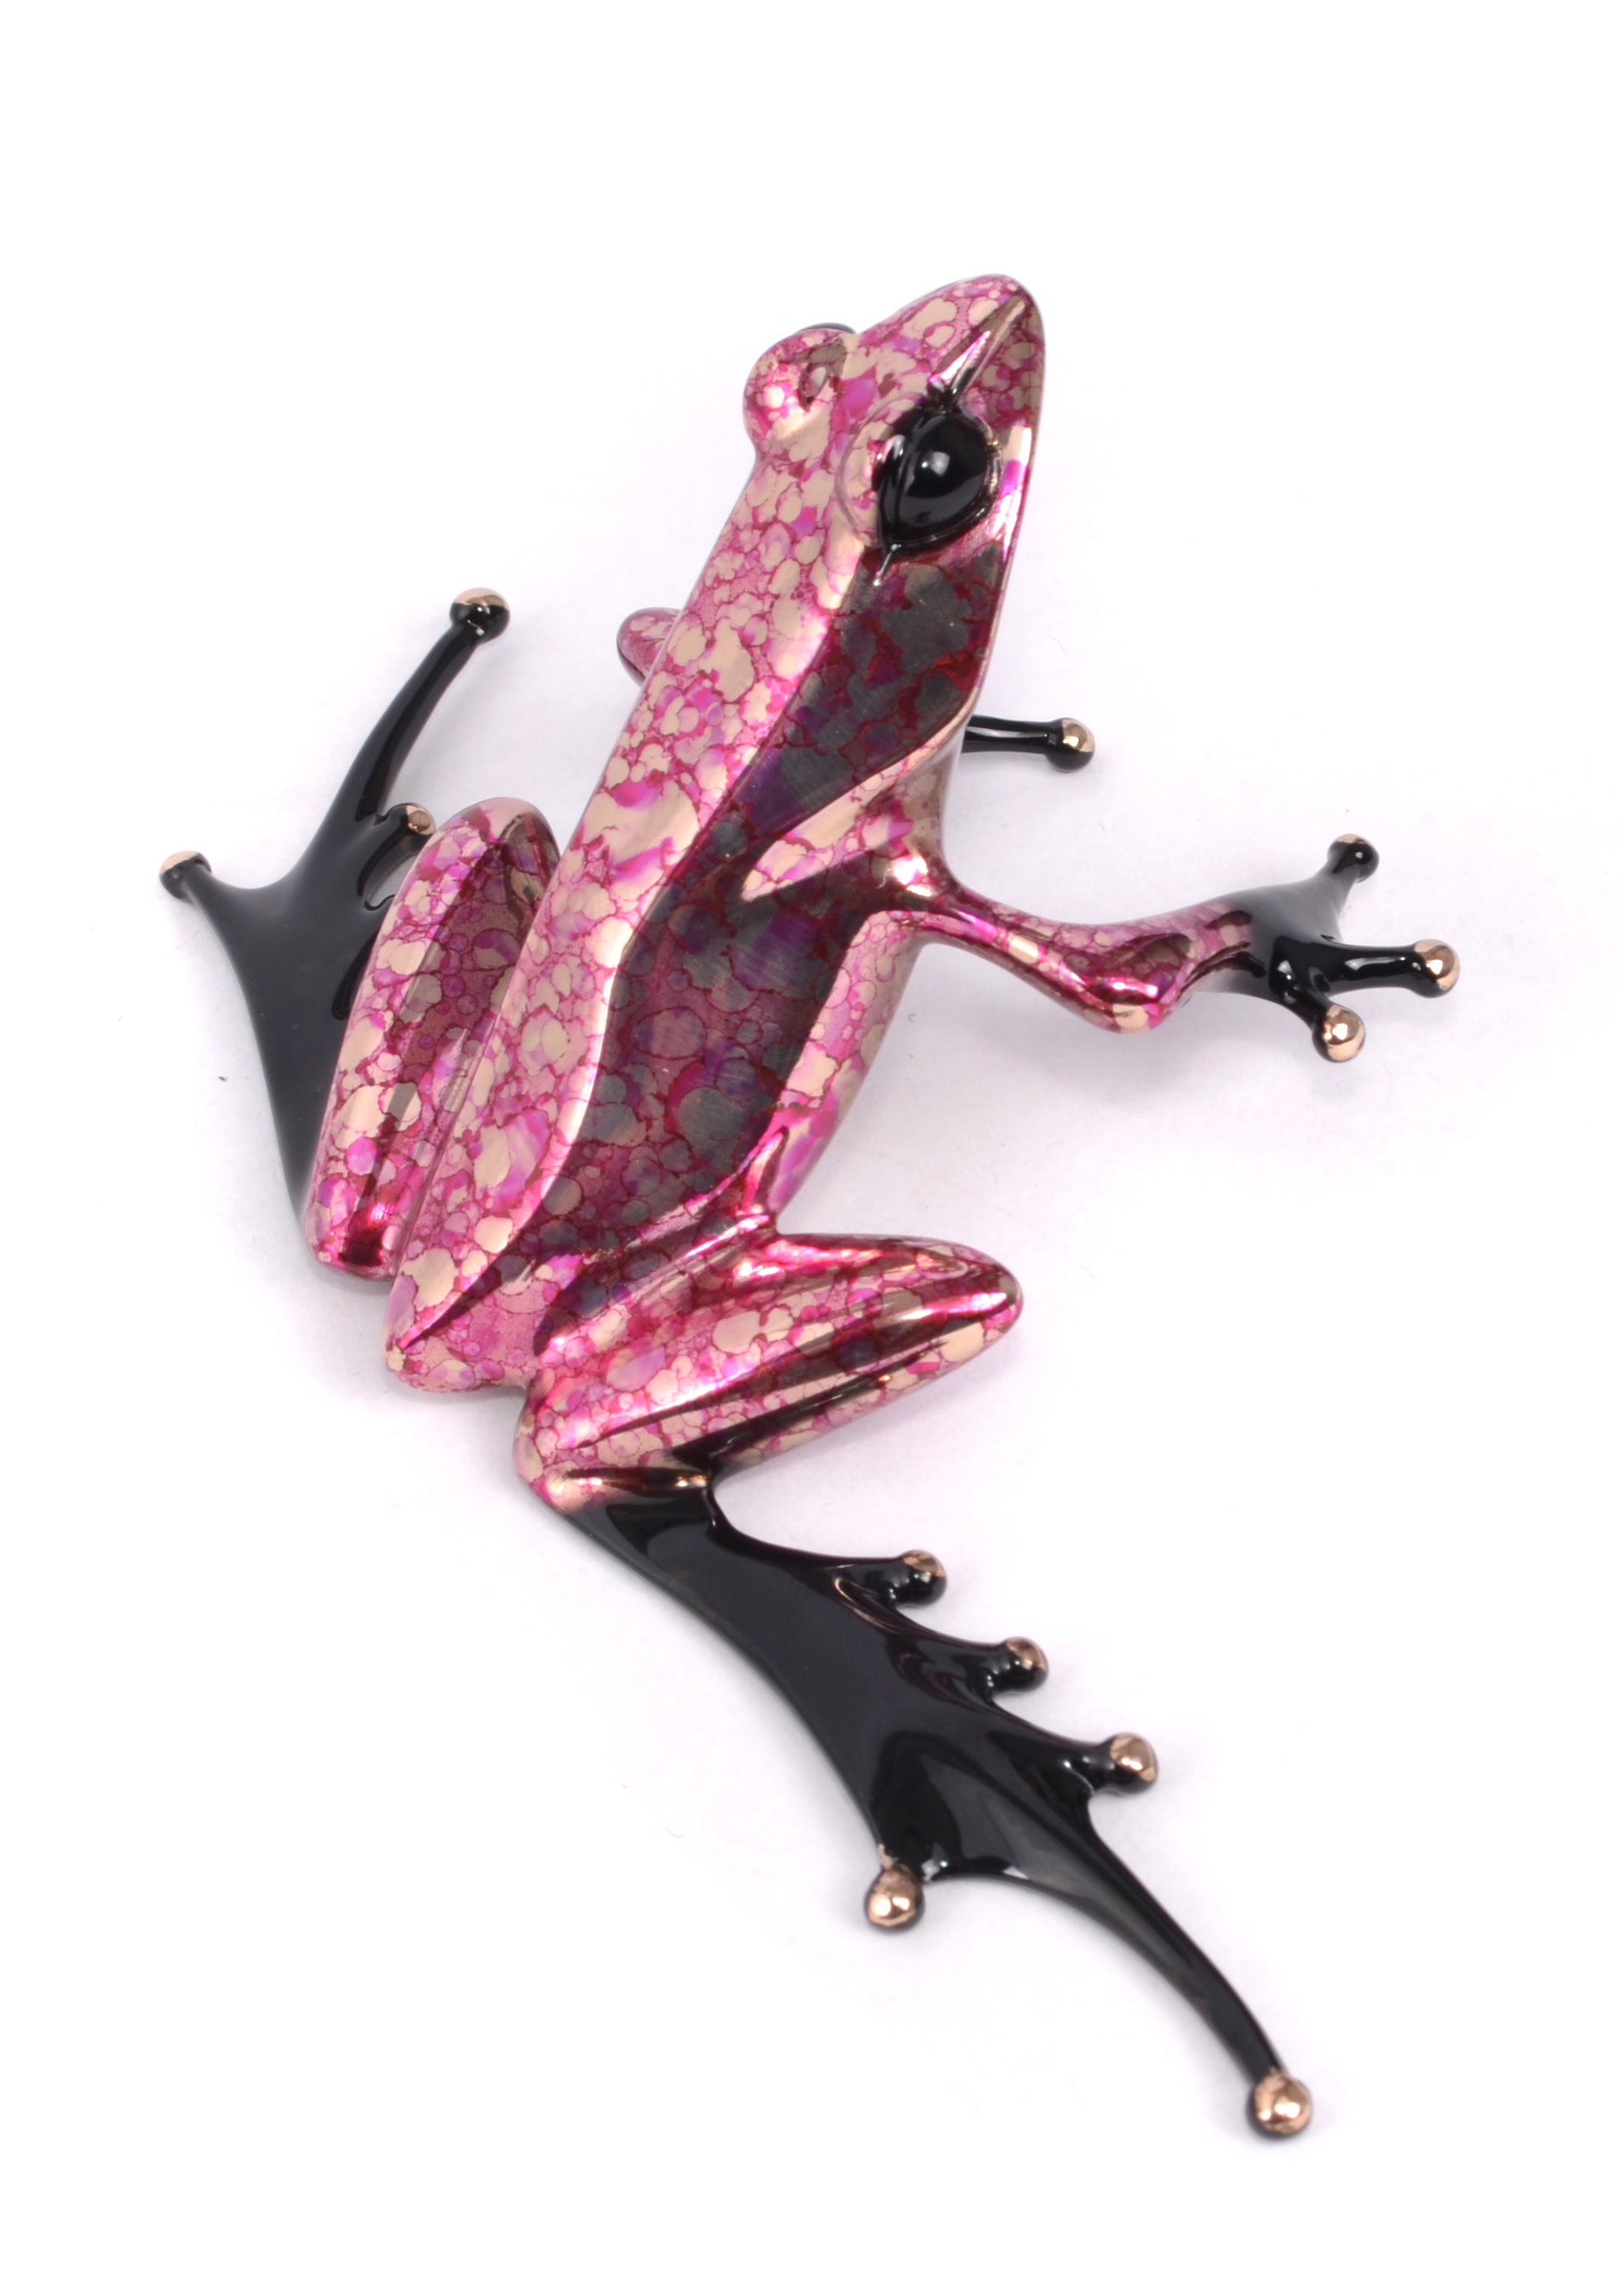 Signed, limited edition bronze frog sculpture